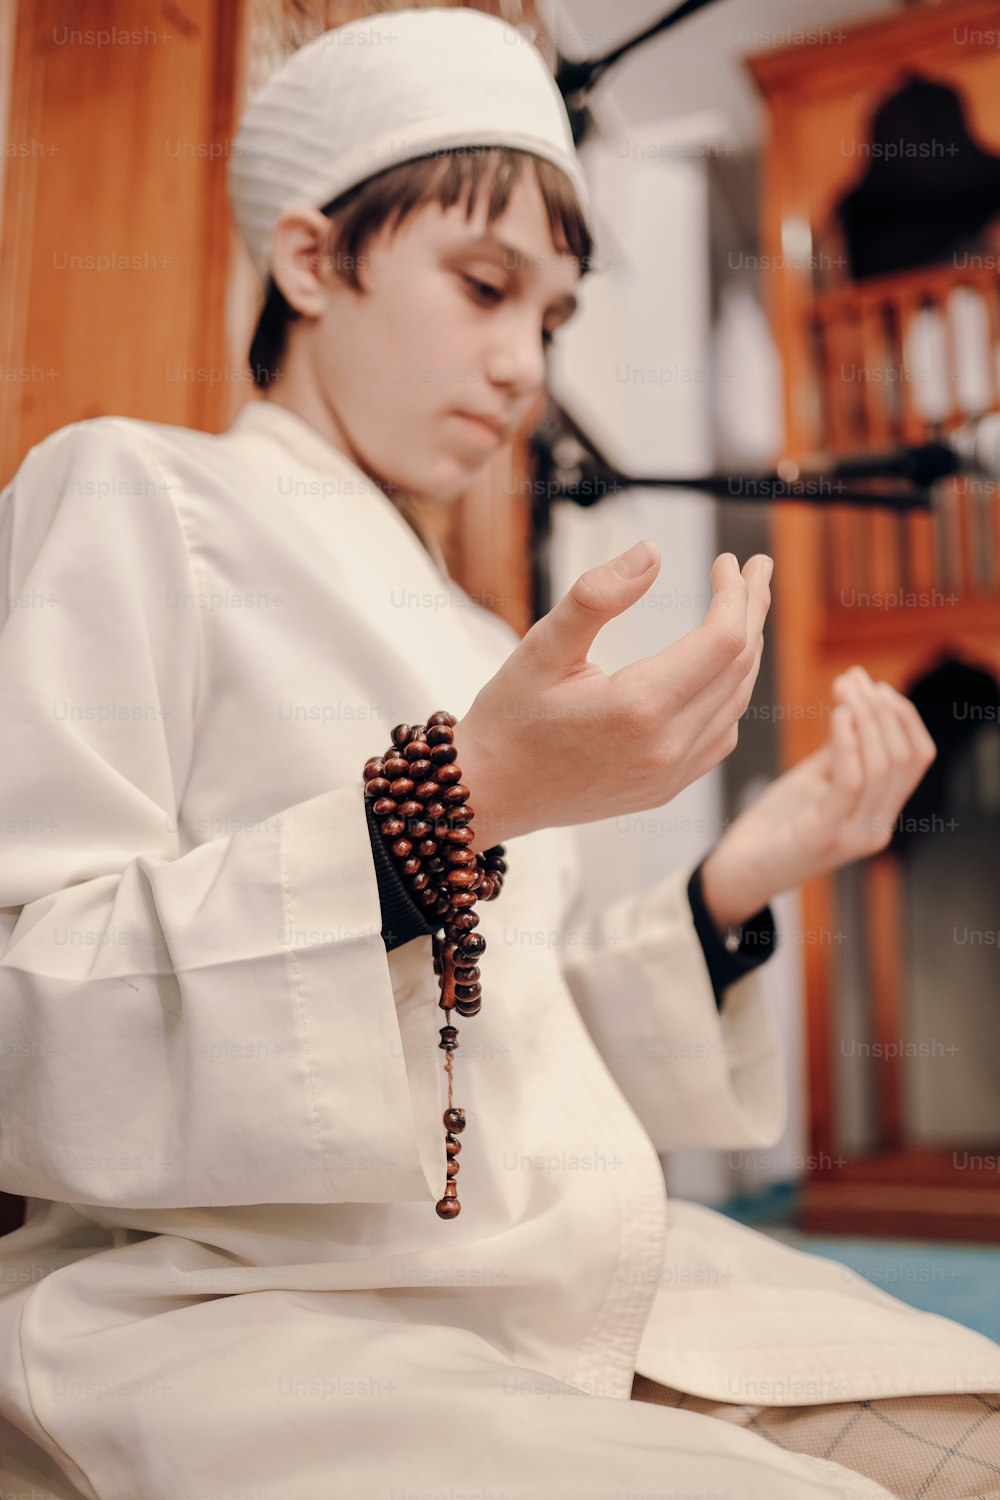 a young boy wearing a white outfit and a beaded bracelet